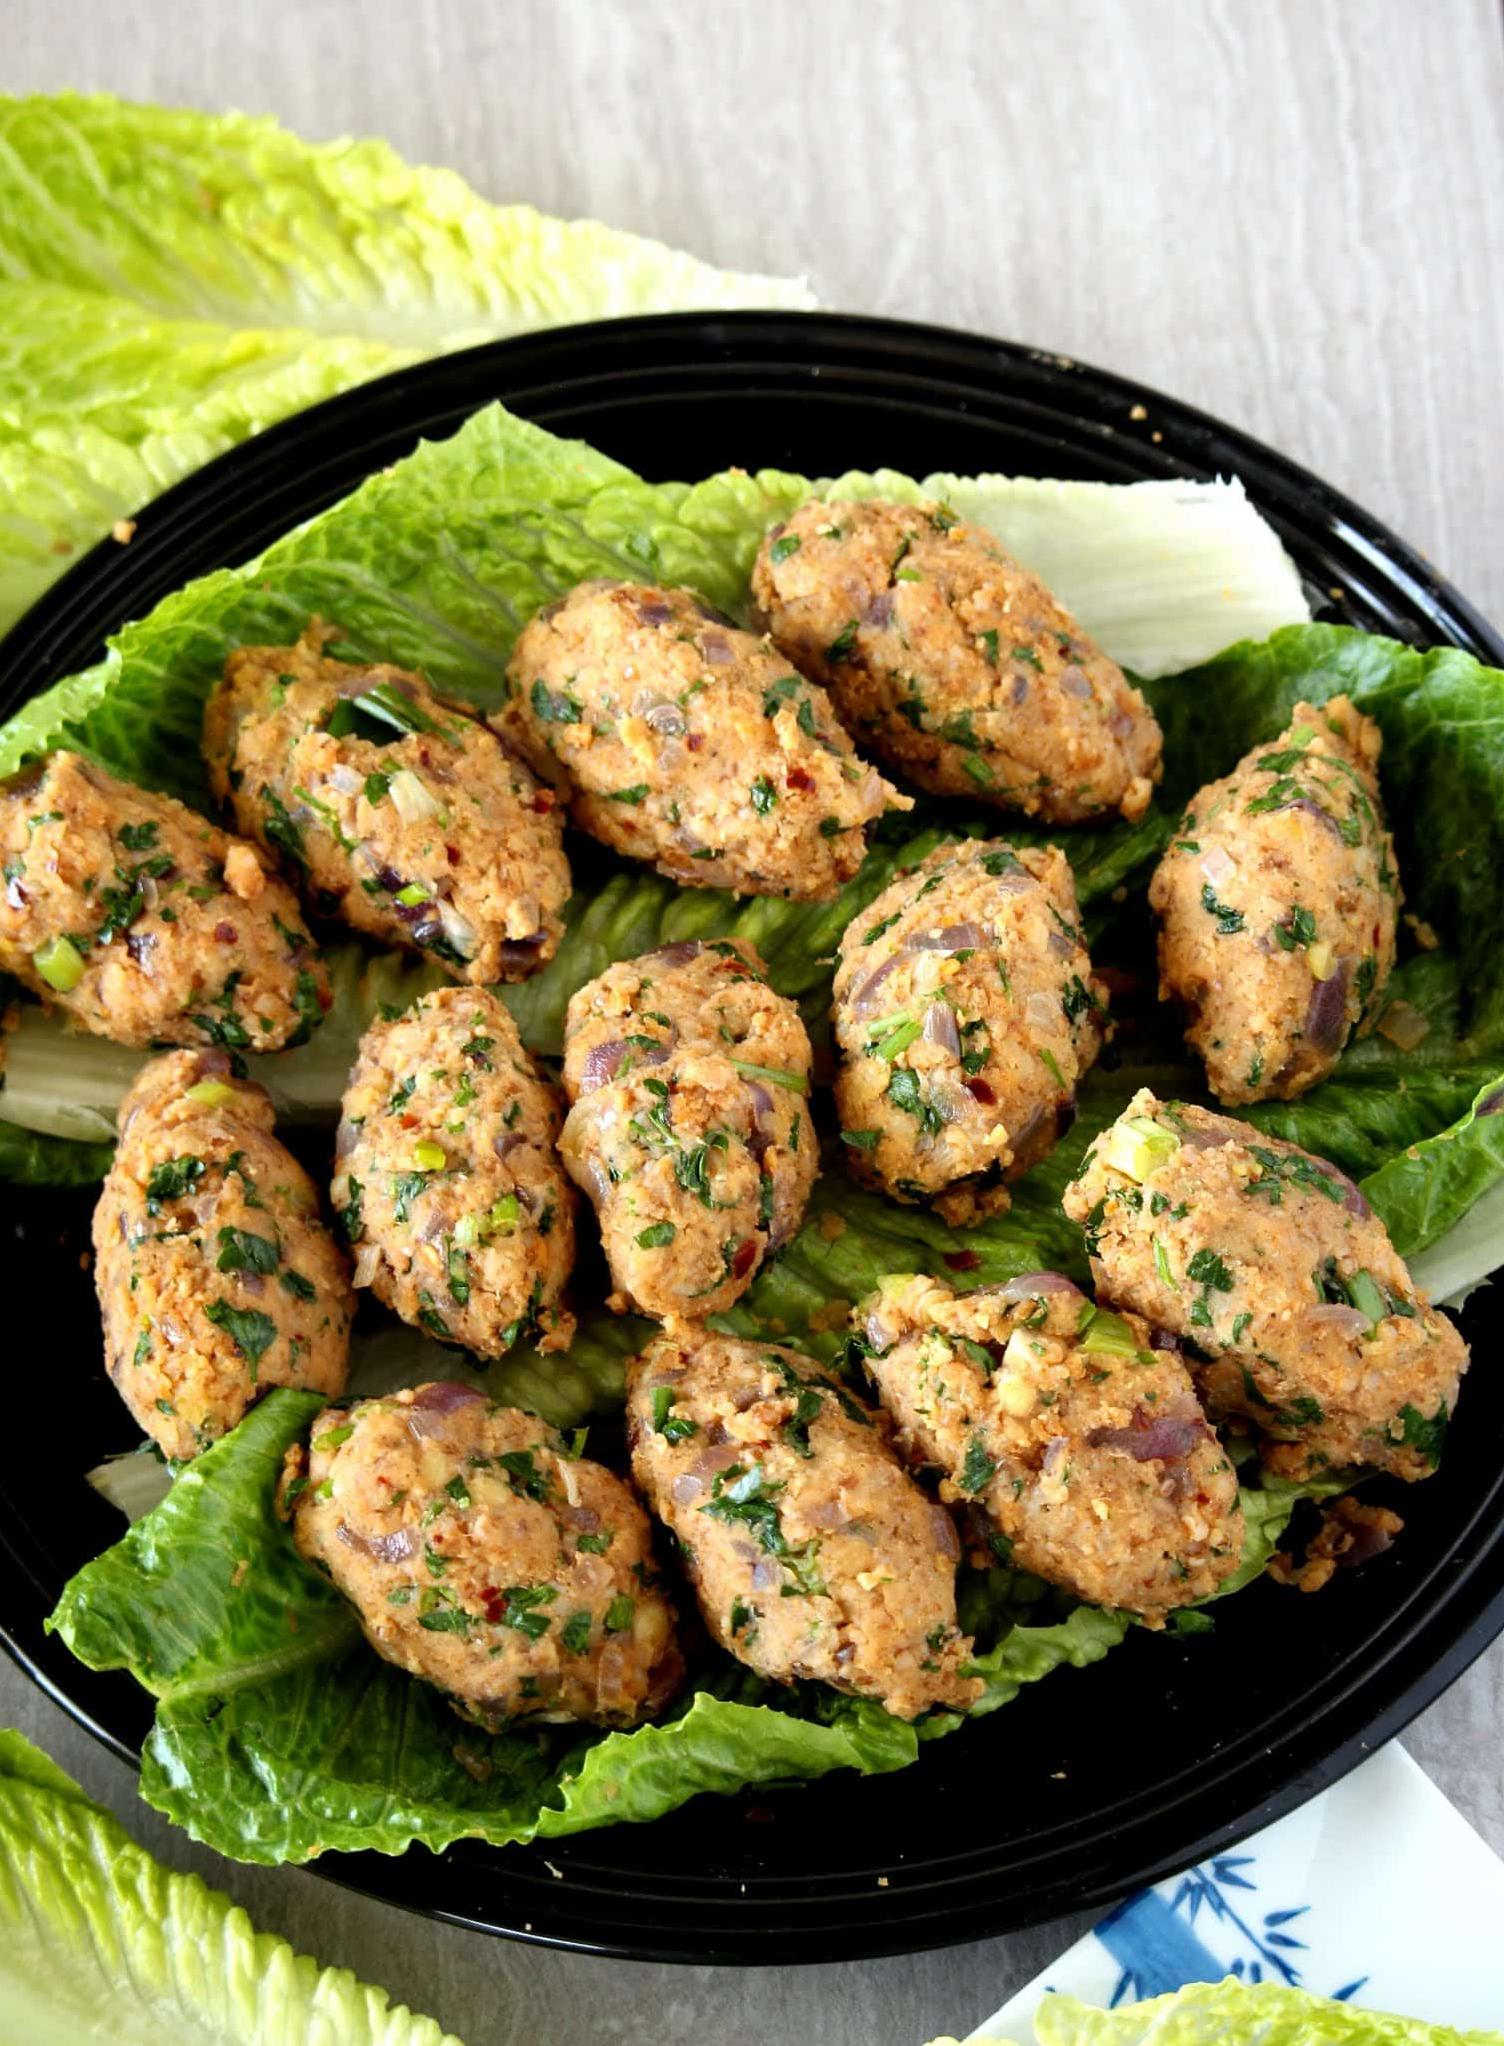  The colors and textures of these Red Lentil Koftes will make your tastebuds dance!